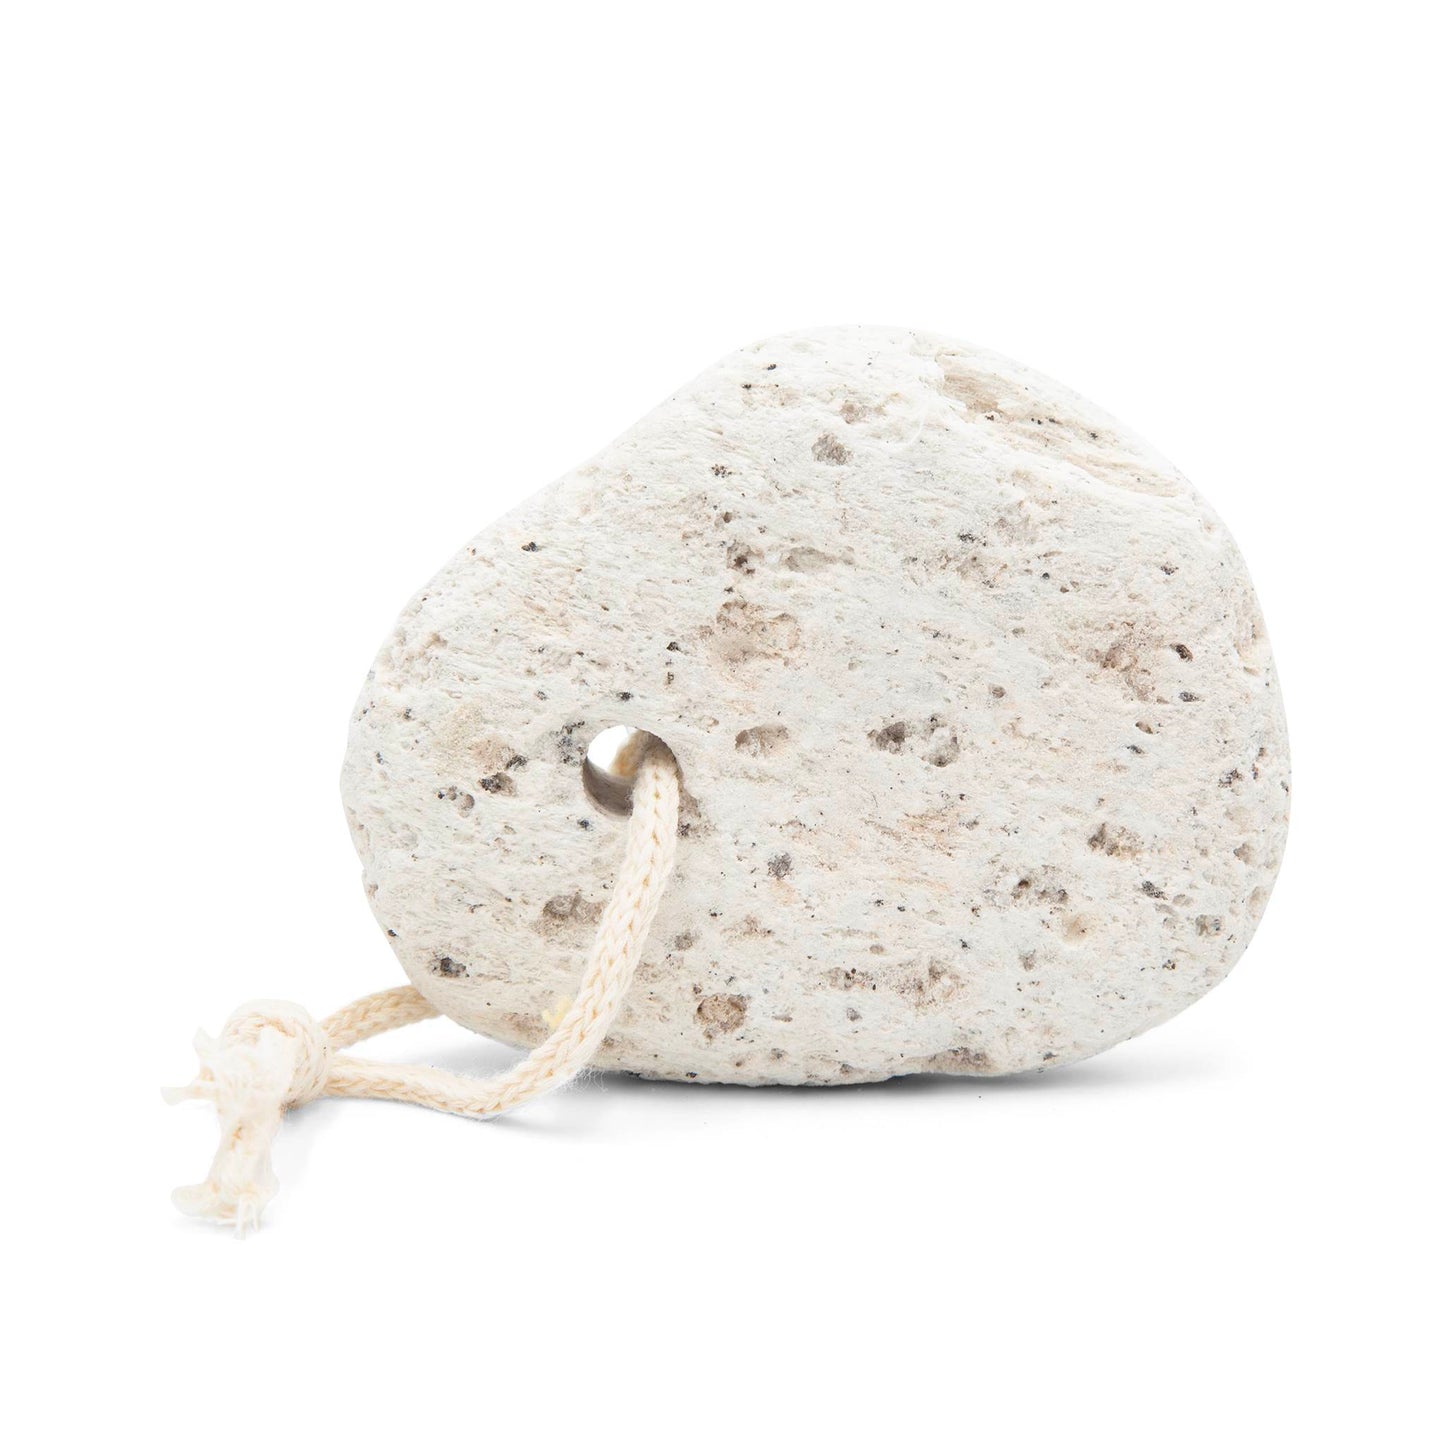 Faerly Foot Care Exfoliating Pumice Stone on a Rope - Natural Lava